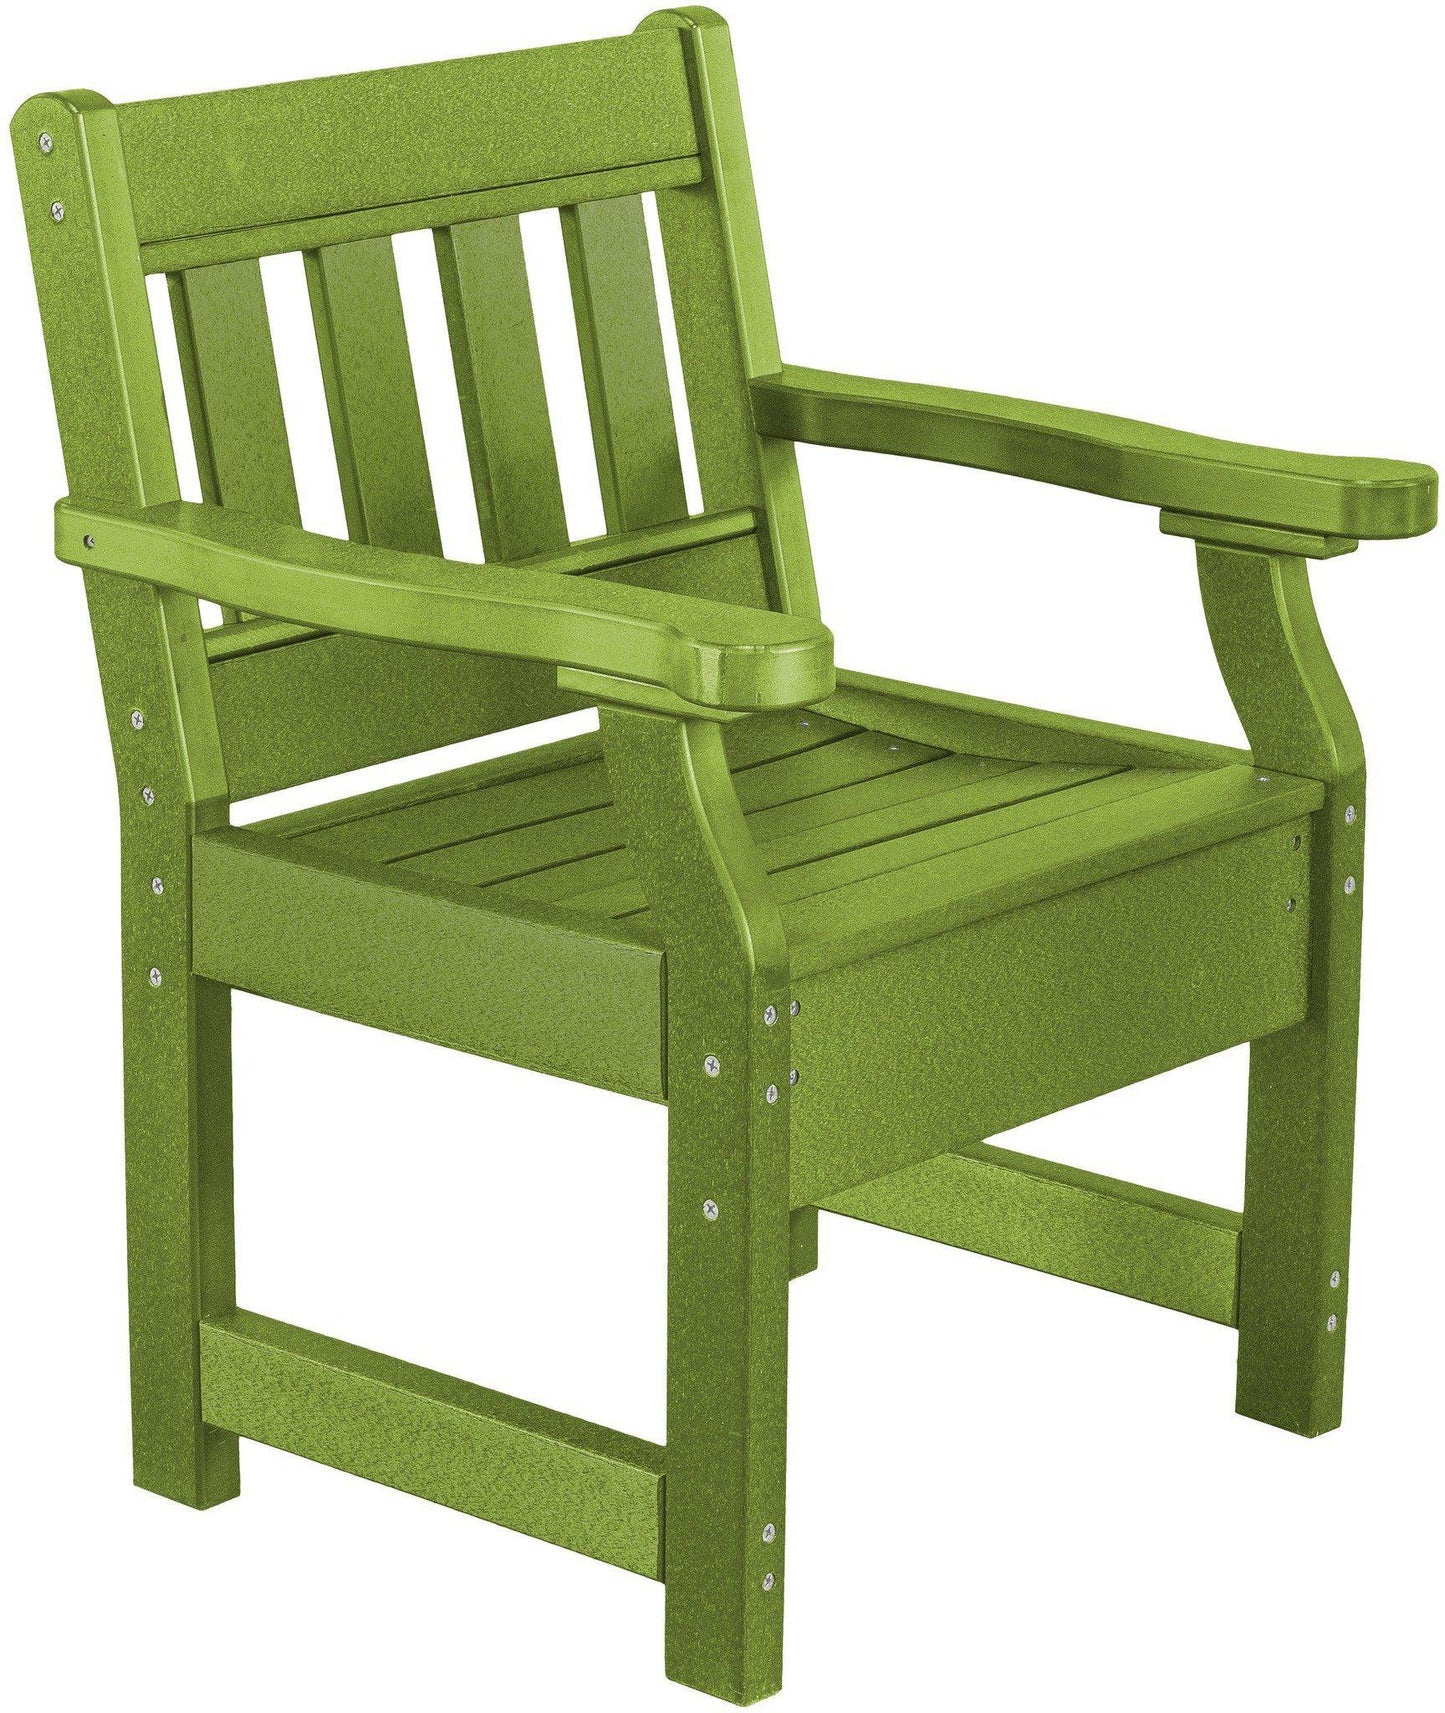 Wildridge Heritage Recycled Plastic Outdoor Garden Chair - LEAD TIME TO SHIP 6 WEEKS OR LESS